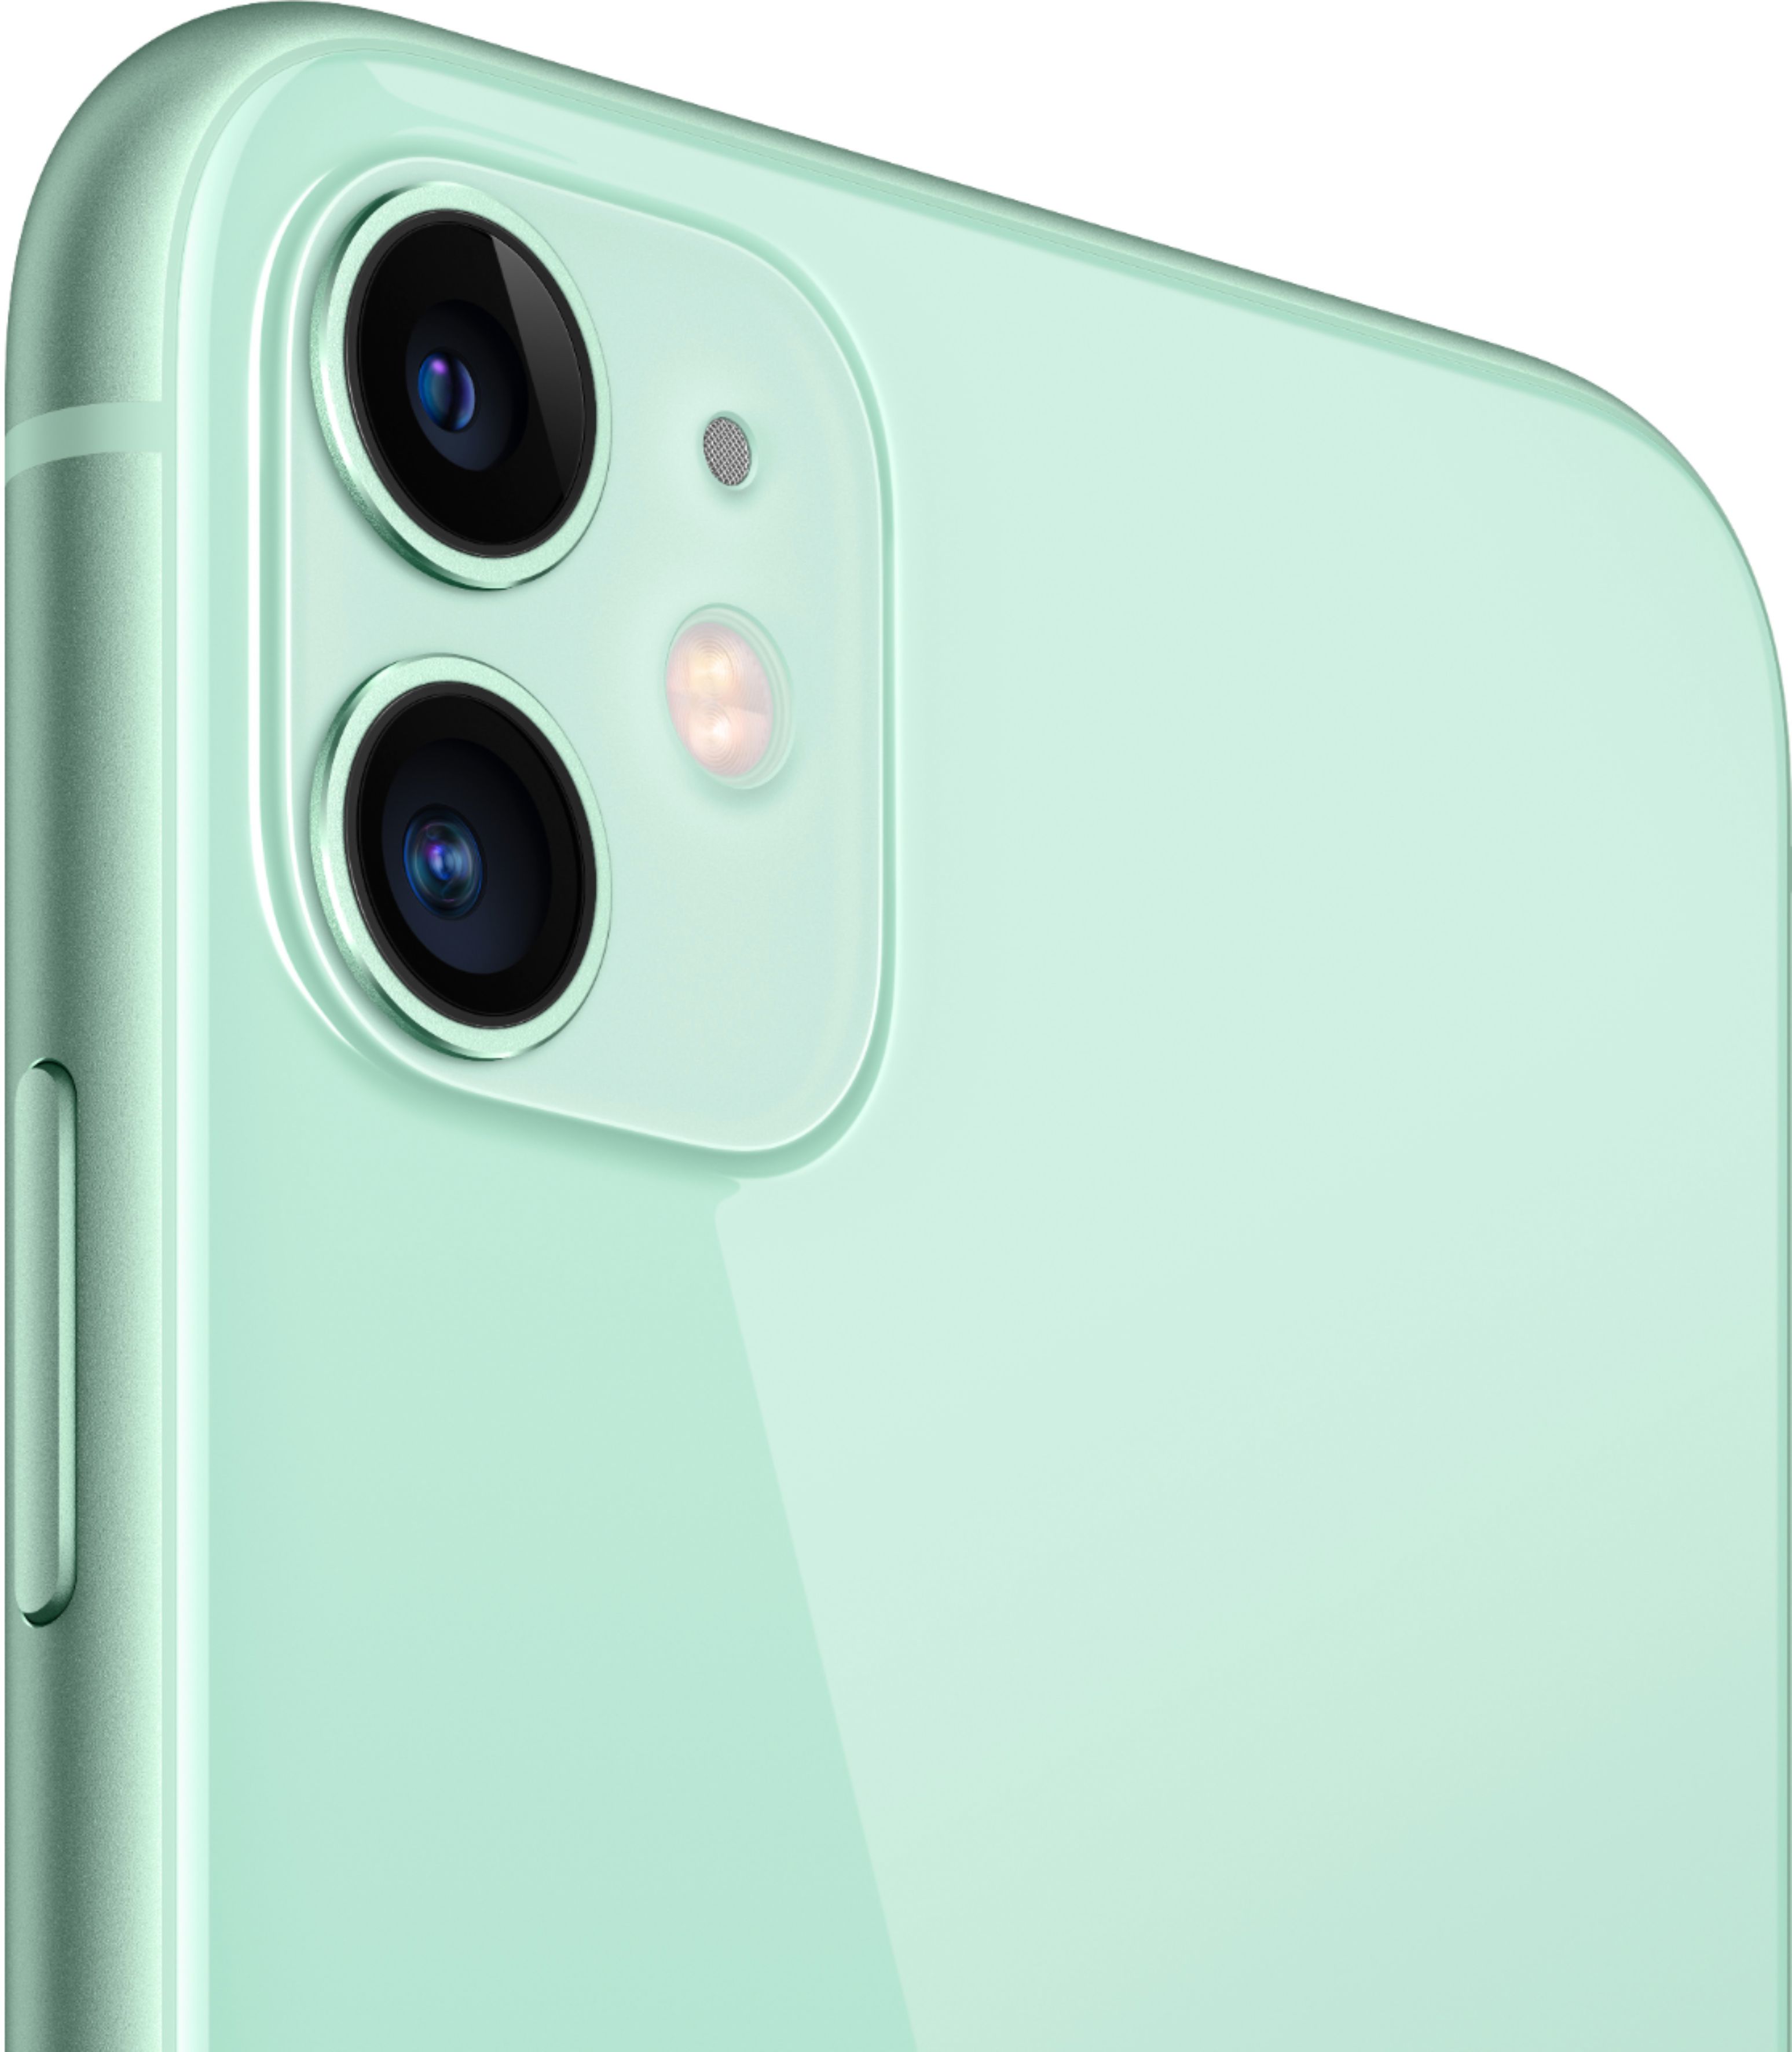 Zeal fond del Best Buy: Apple iPhone 11 256GB Green (AT&T) MWLR2LL/A